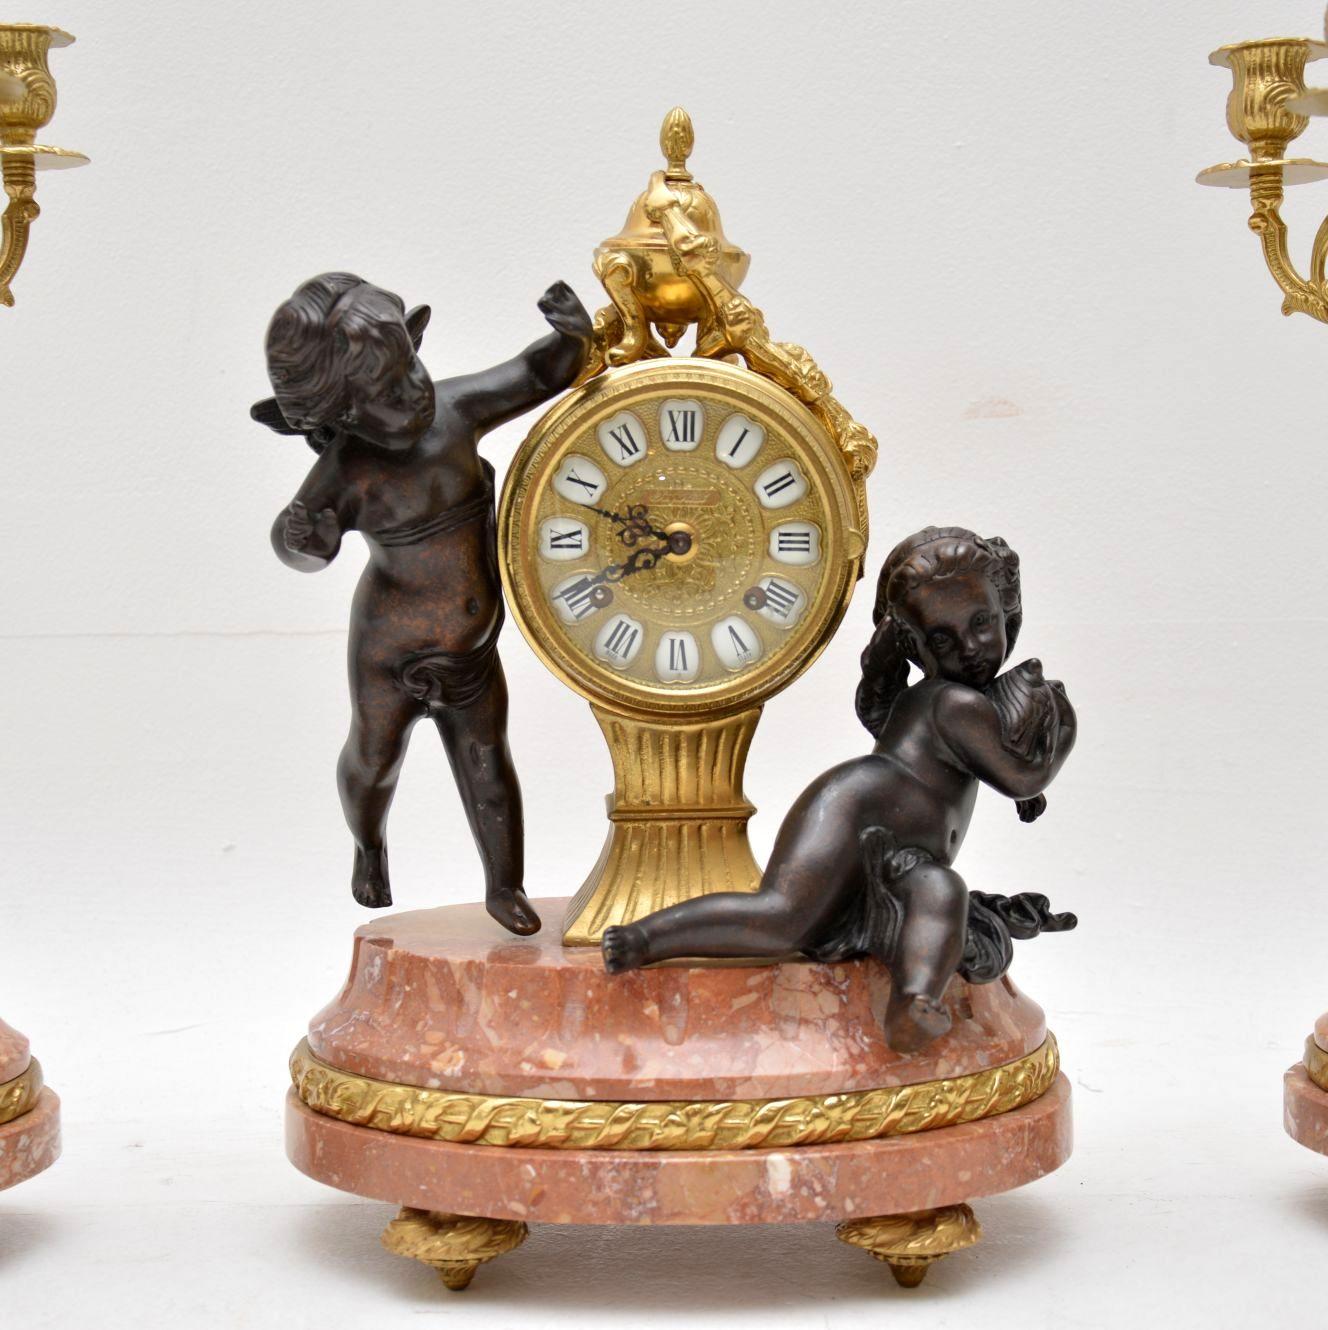 Antique French or Italian style clock and two matching candelabras in excellent condition. The clock is called an Imperial Clock and the movement is by “Franz Hermle”. The clock is in working order too and has a chime. They are very decorative